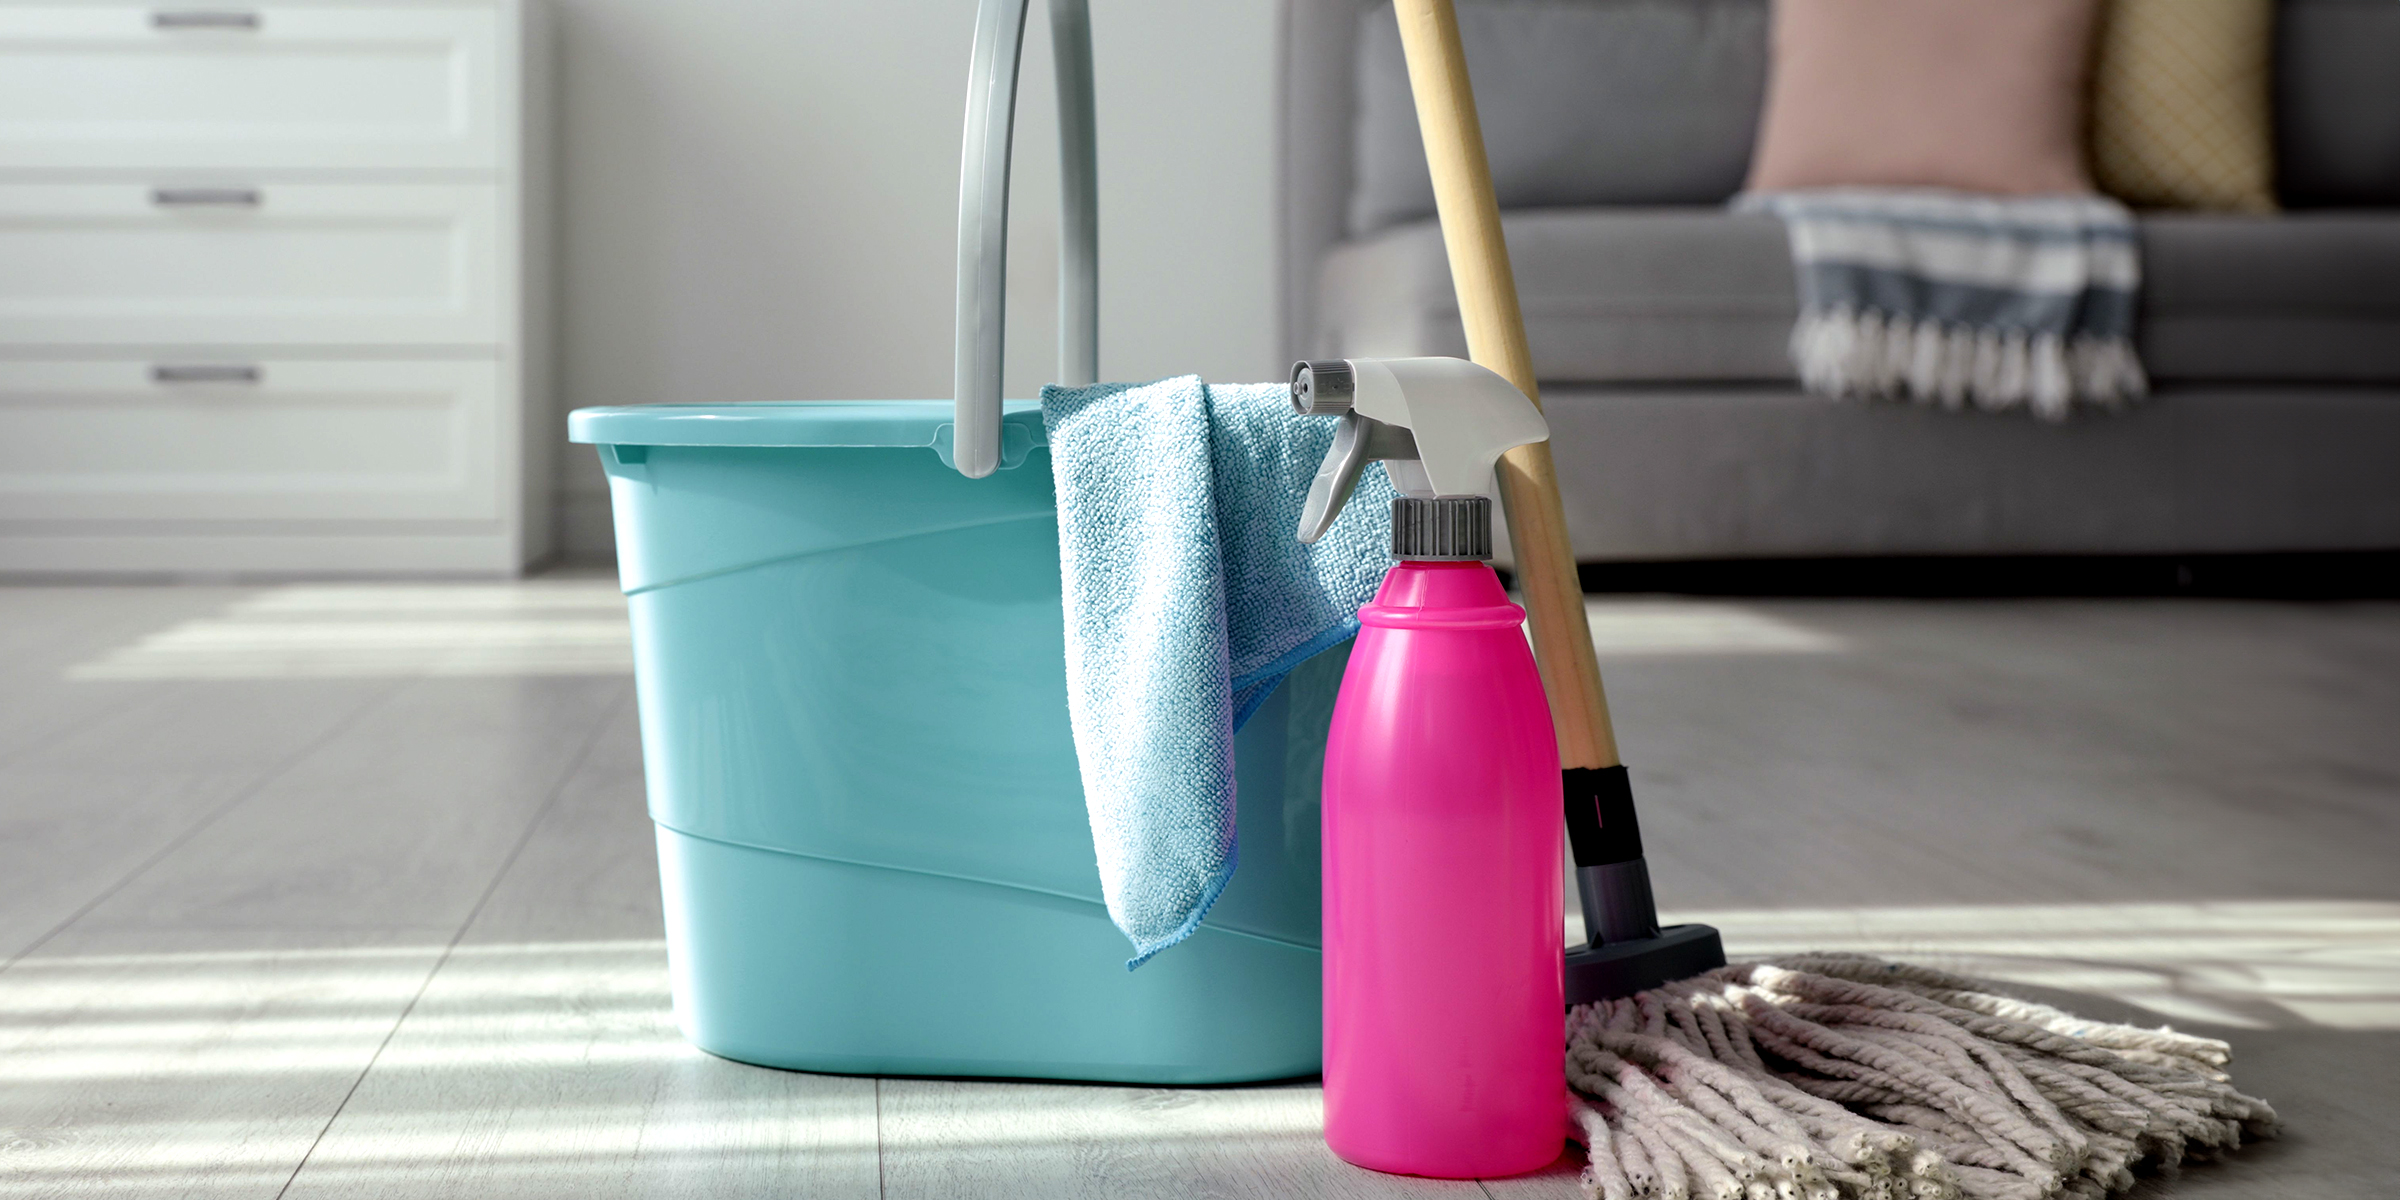 Cleaning supplies | Source: Shutterstock